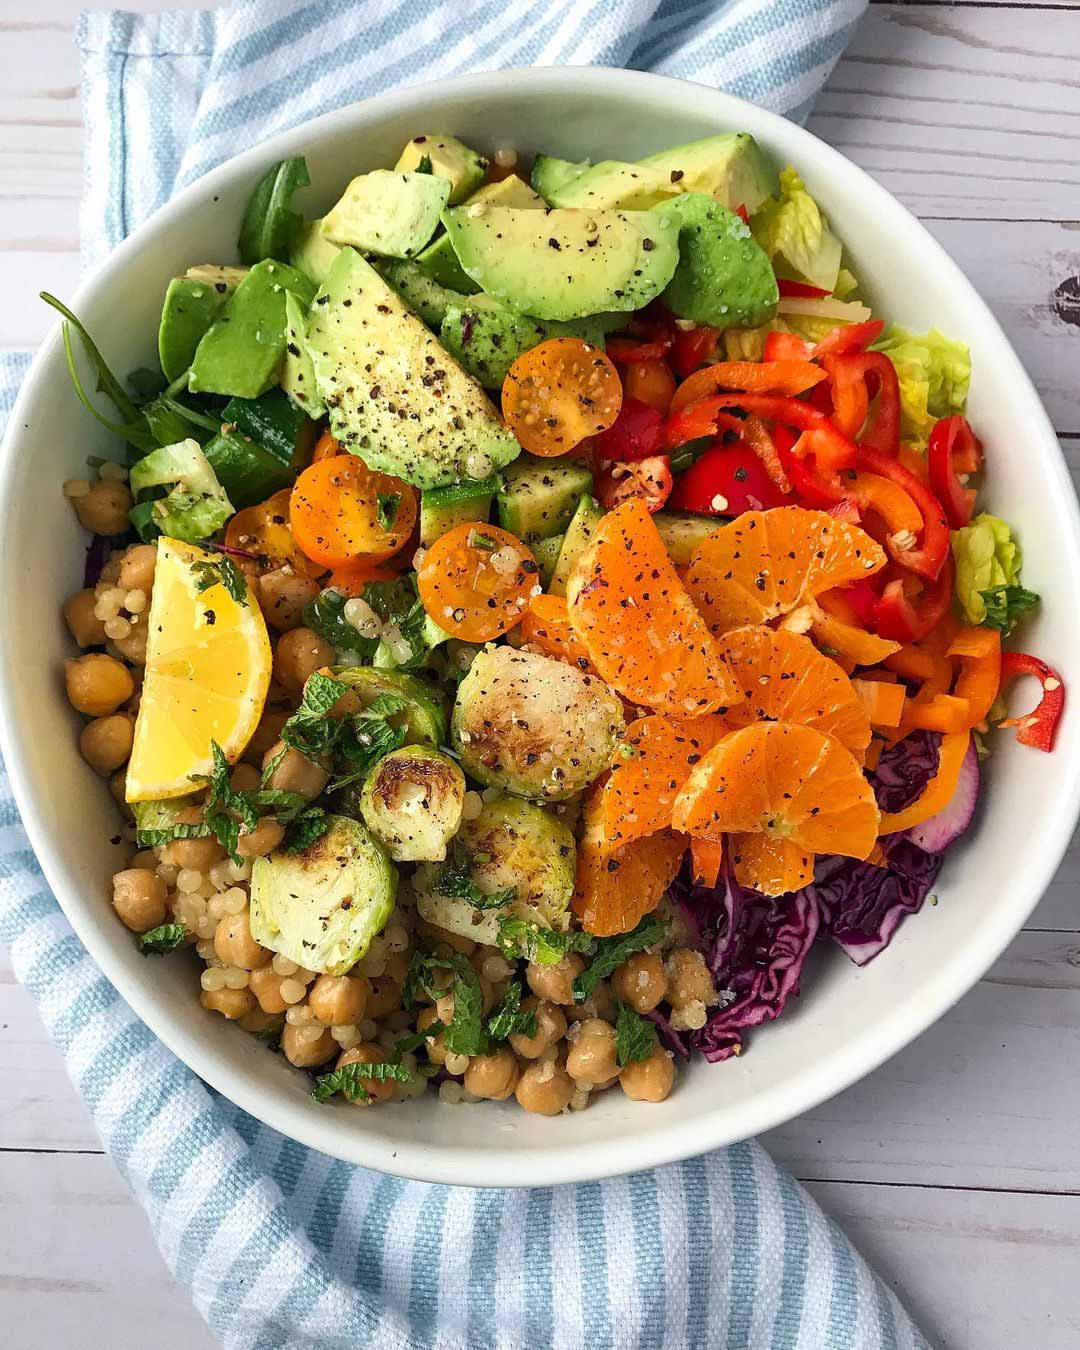 Warm Chickpea & Brussels Sprouts Couscous Salad recipe served in a bowl.